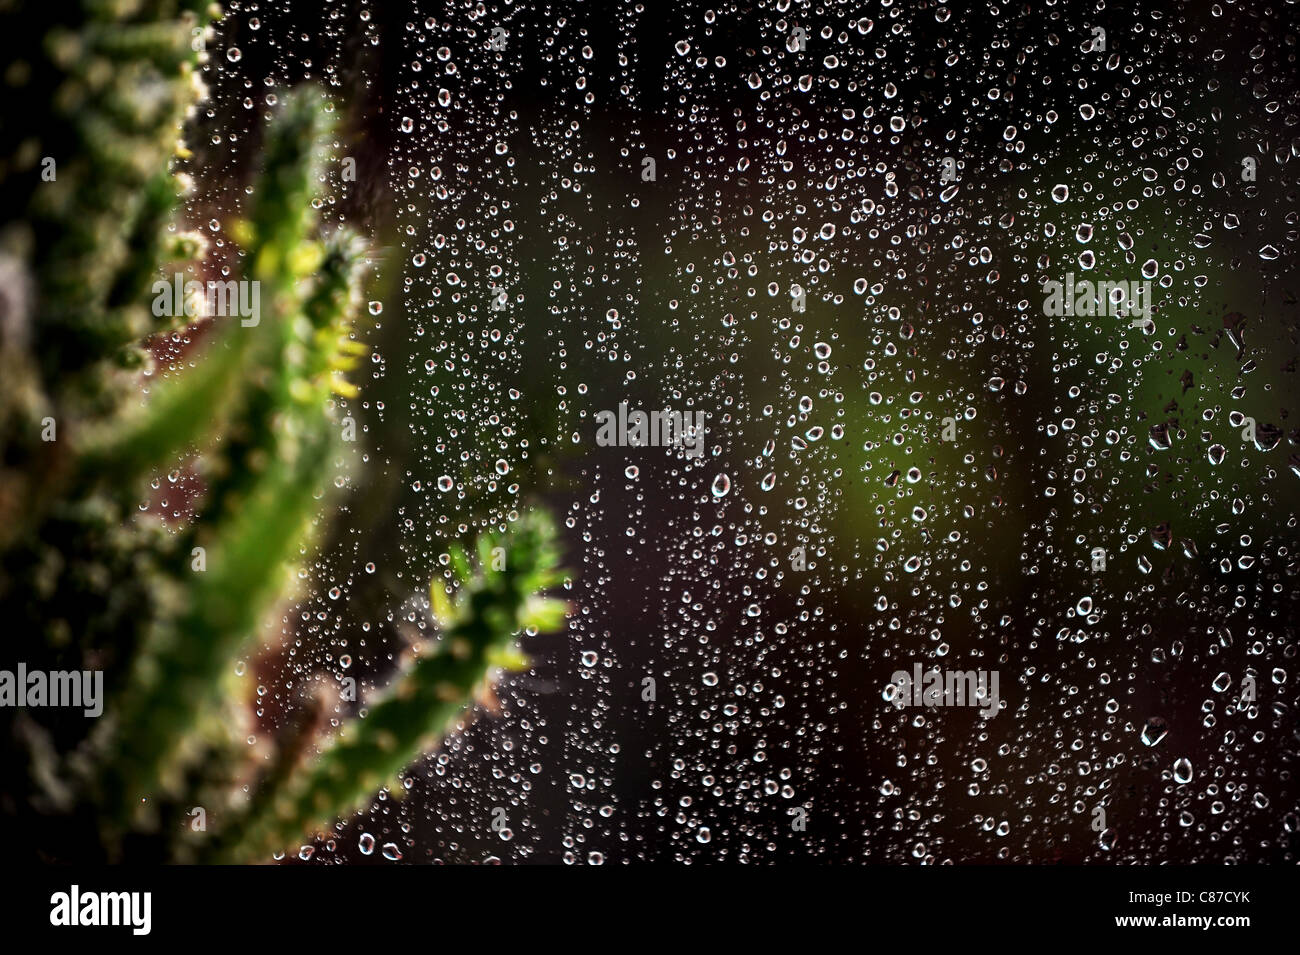 Rain on windows of a house in Bolton, Lancashire, England. Picture by Paul Heyes, Sunday October 09, 2011. Stock Photo